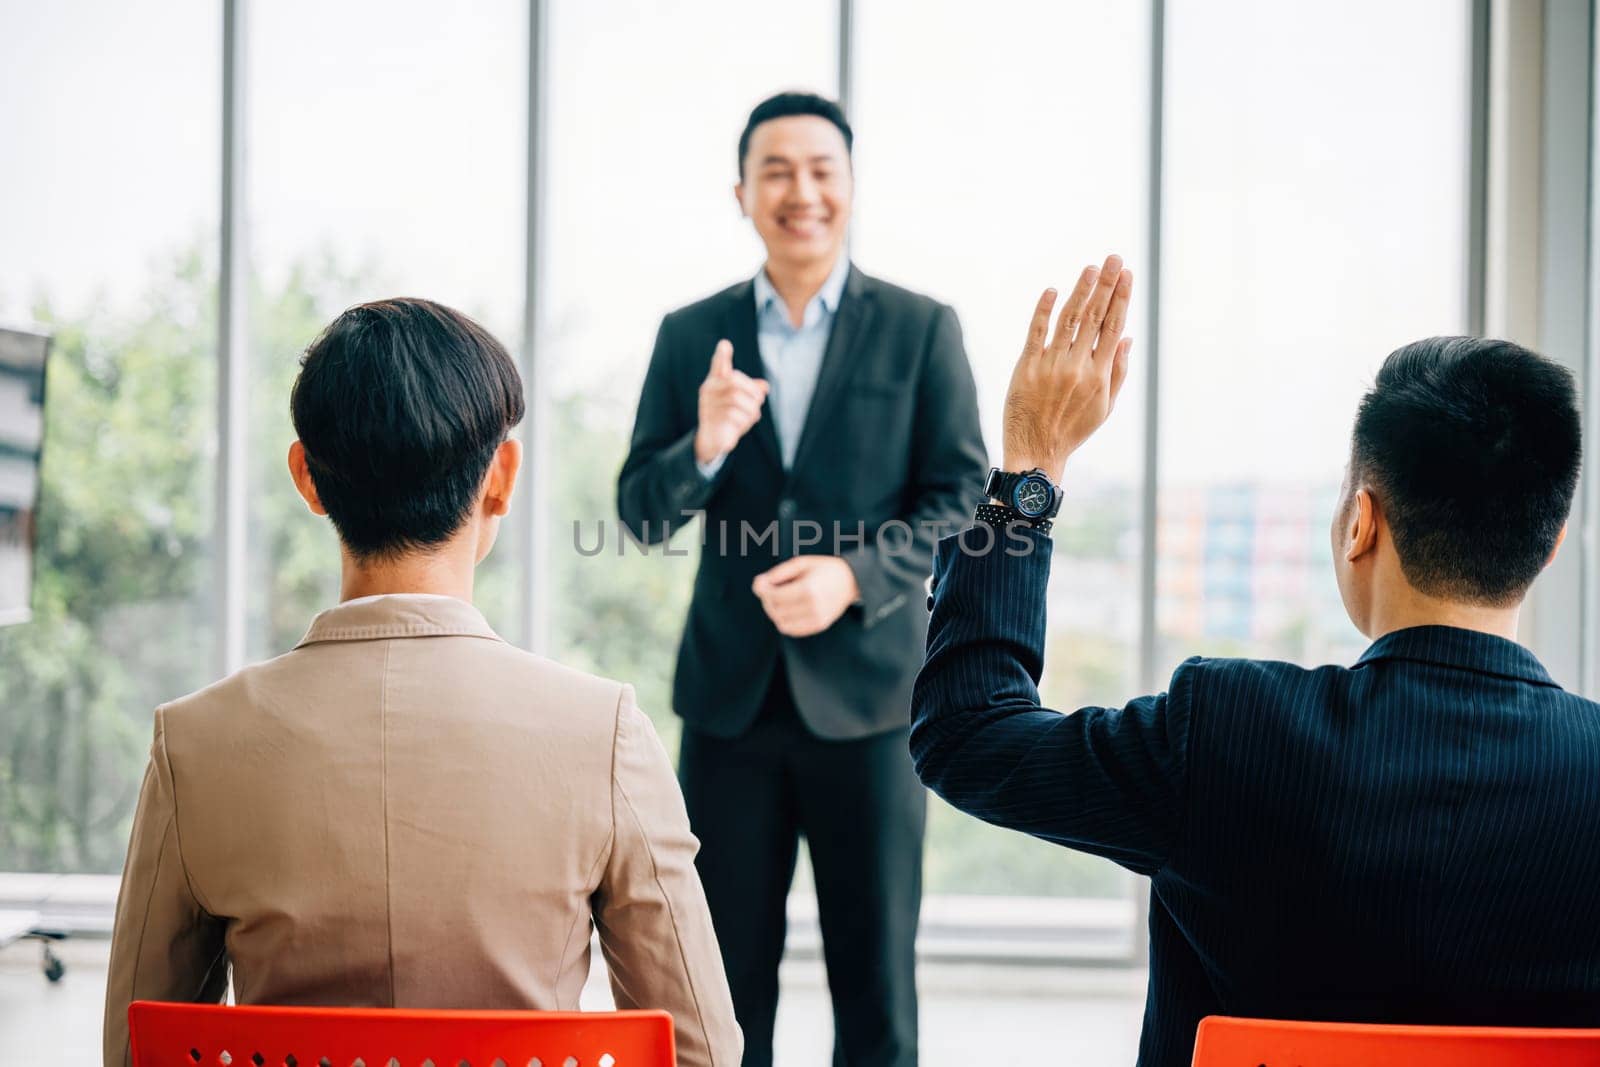 At a corporate event, a diverse audience of businesspeople raises their hands for questions, voting, or volunteering. The scene highlights teamwork and interactive audience participation. by Sorapop